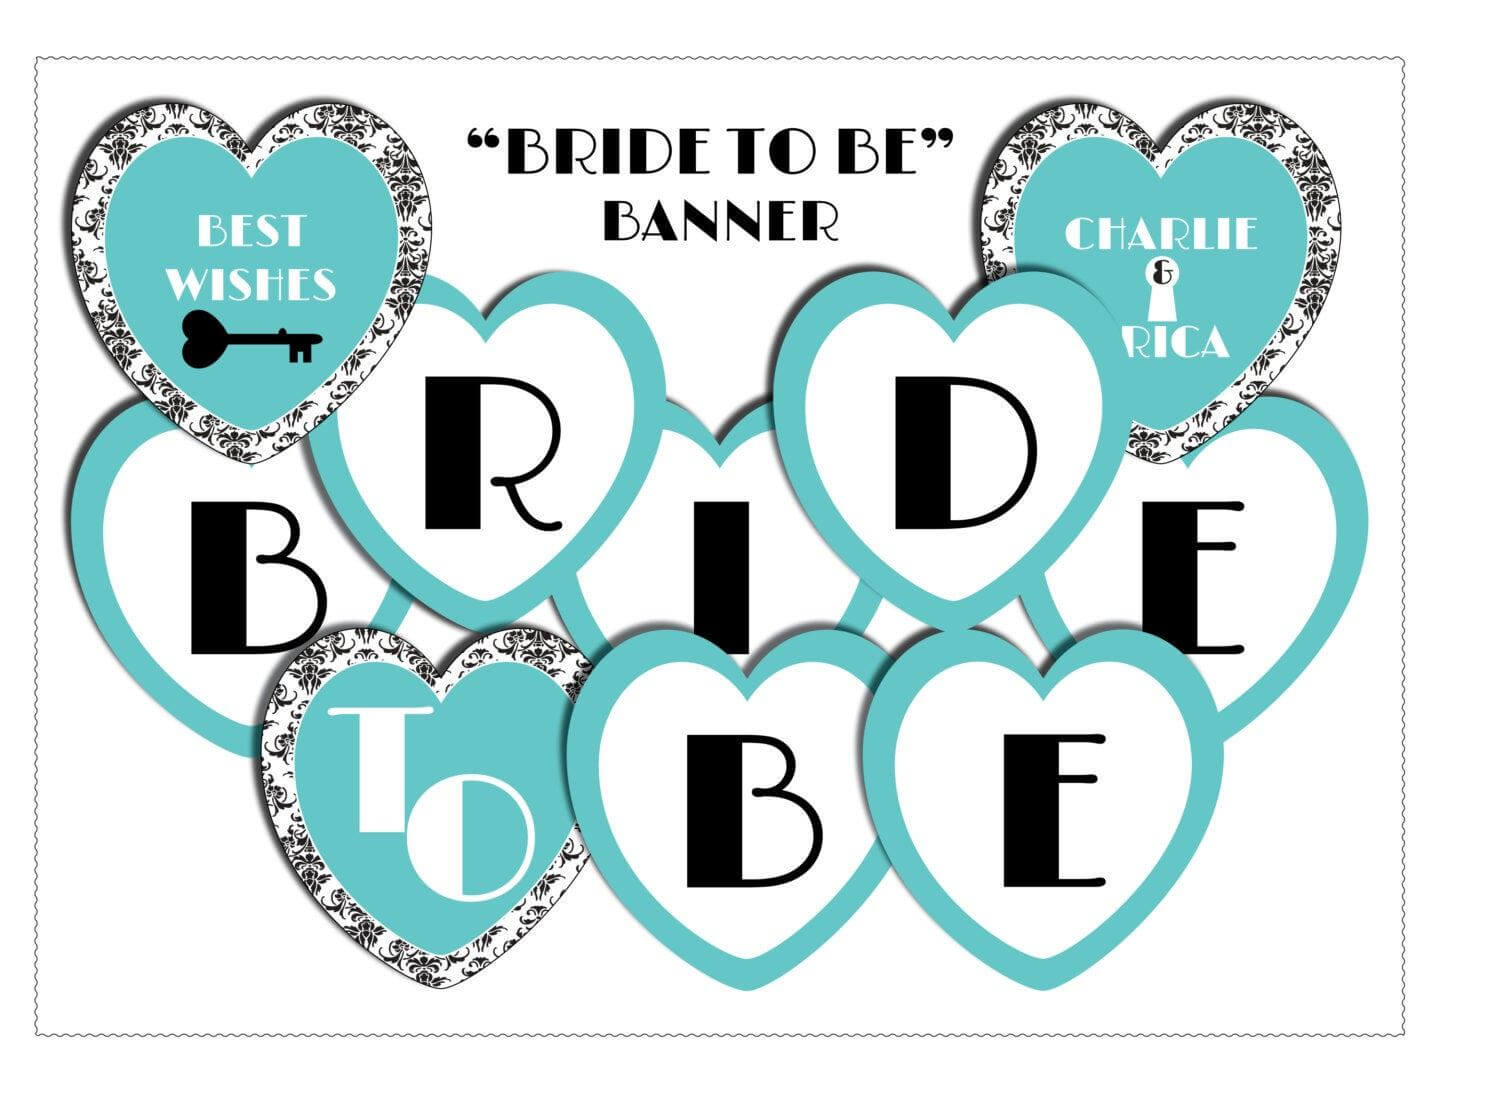 Bridal Shower Banner Template. 1000 Ideas About Bride To Be In Bride To Be Banner Template